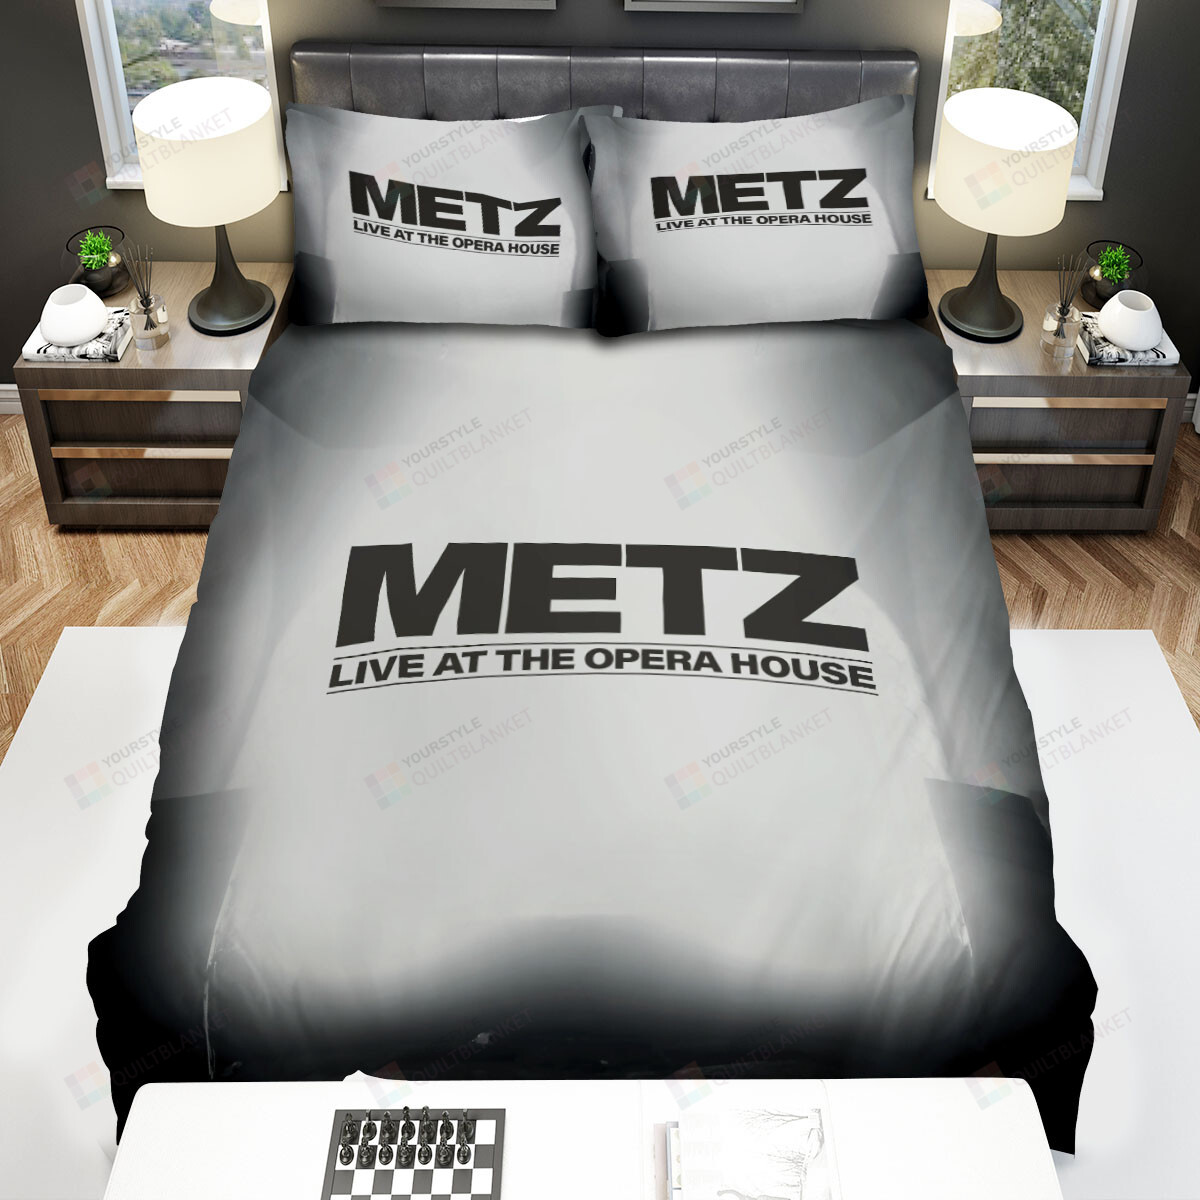 Metz Band Live At The Opera House Bed Sheets Spread Comforter Duvet Cover Bedding Sets